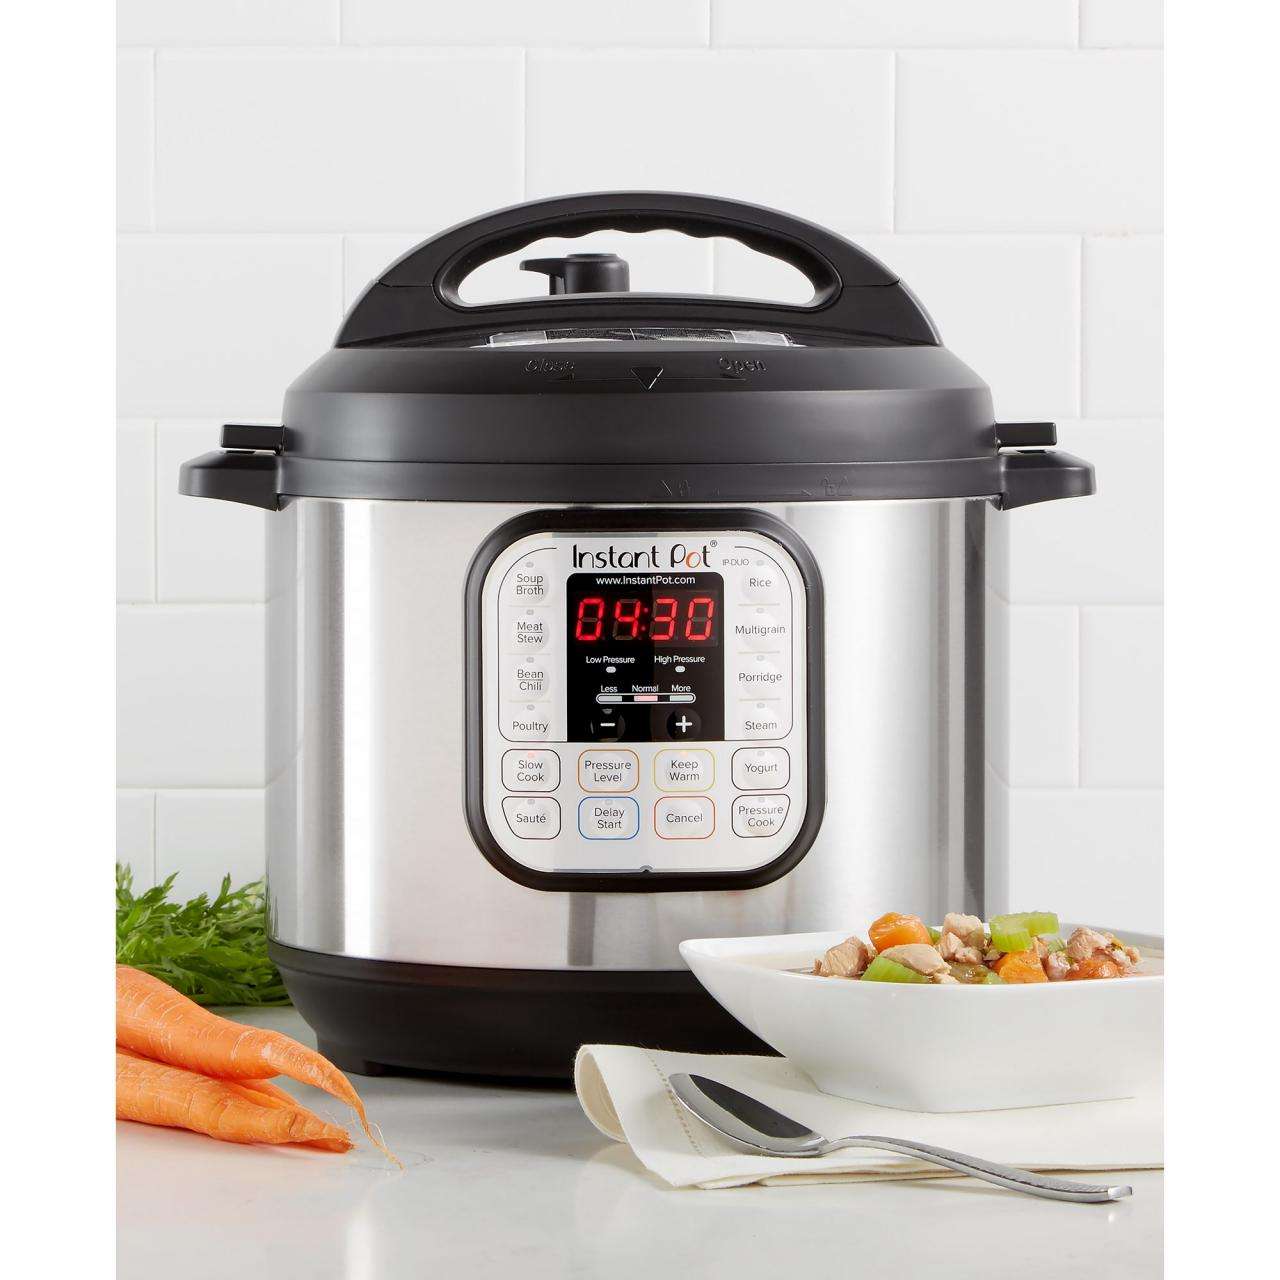 Where to Buy the Instant Pot on Sale